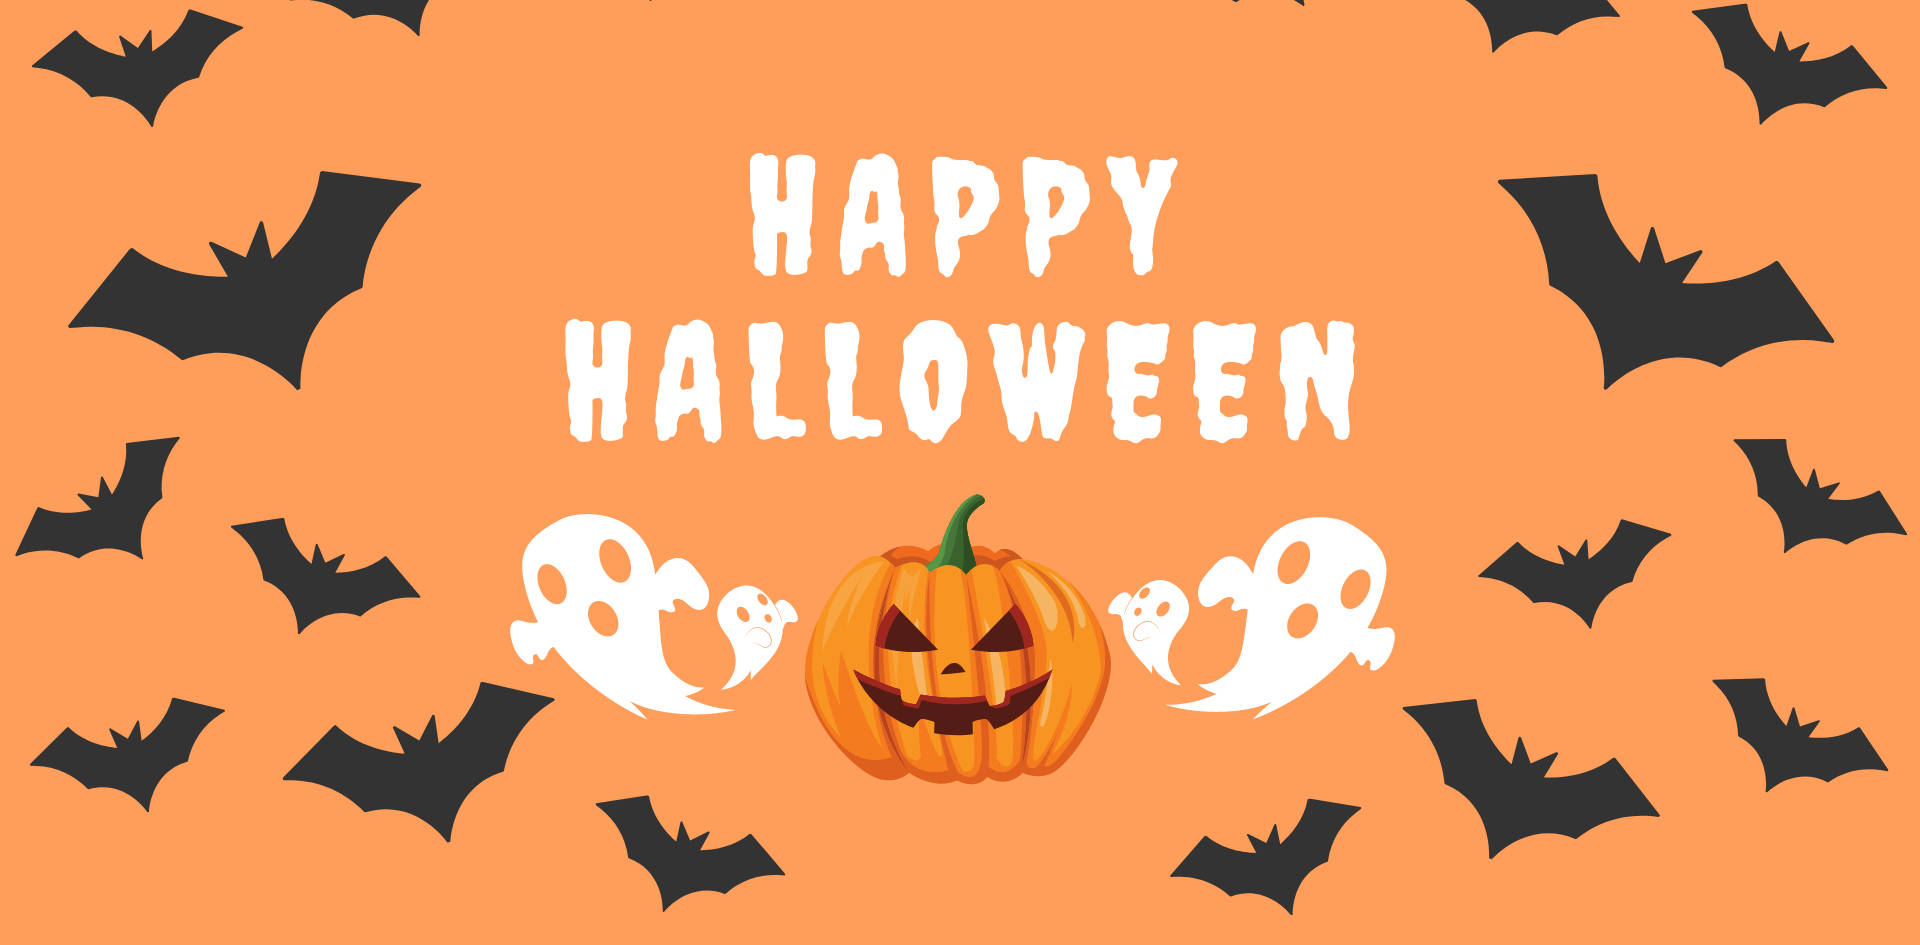 Get ready for a spooky night of Halloween fun! Wallpaper